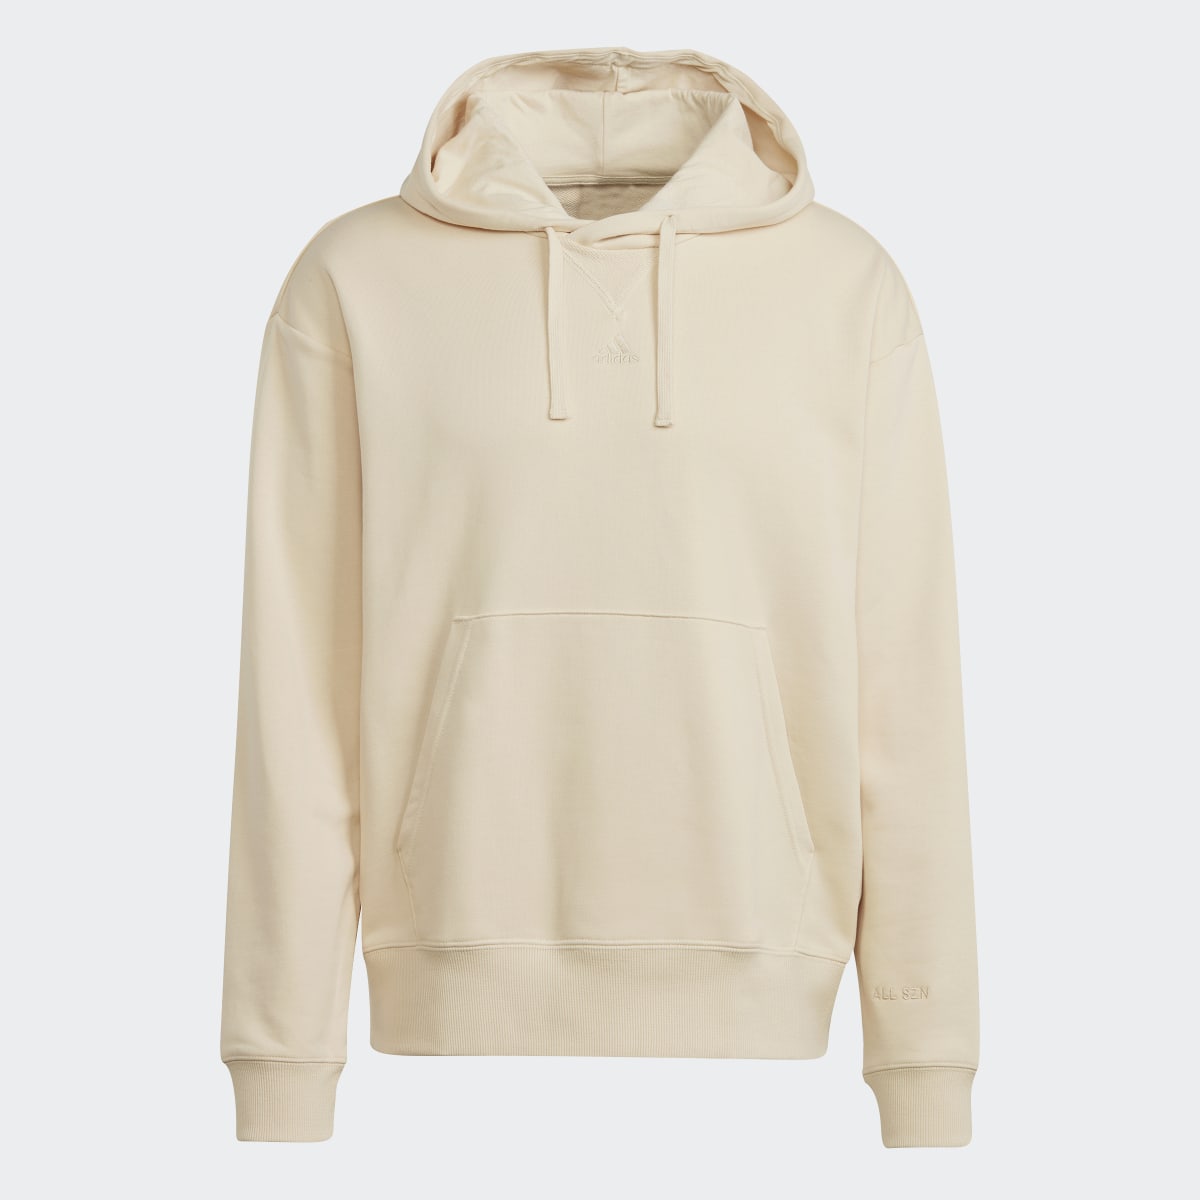 Adidas Hoodie ALL SZN French Terry. 5